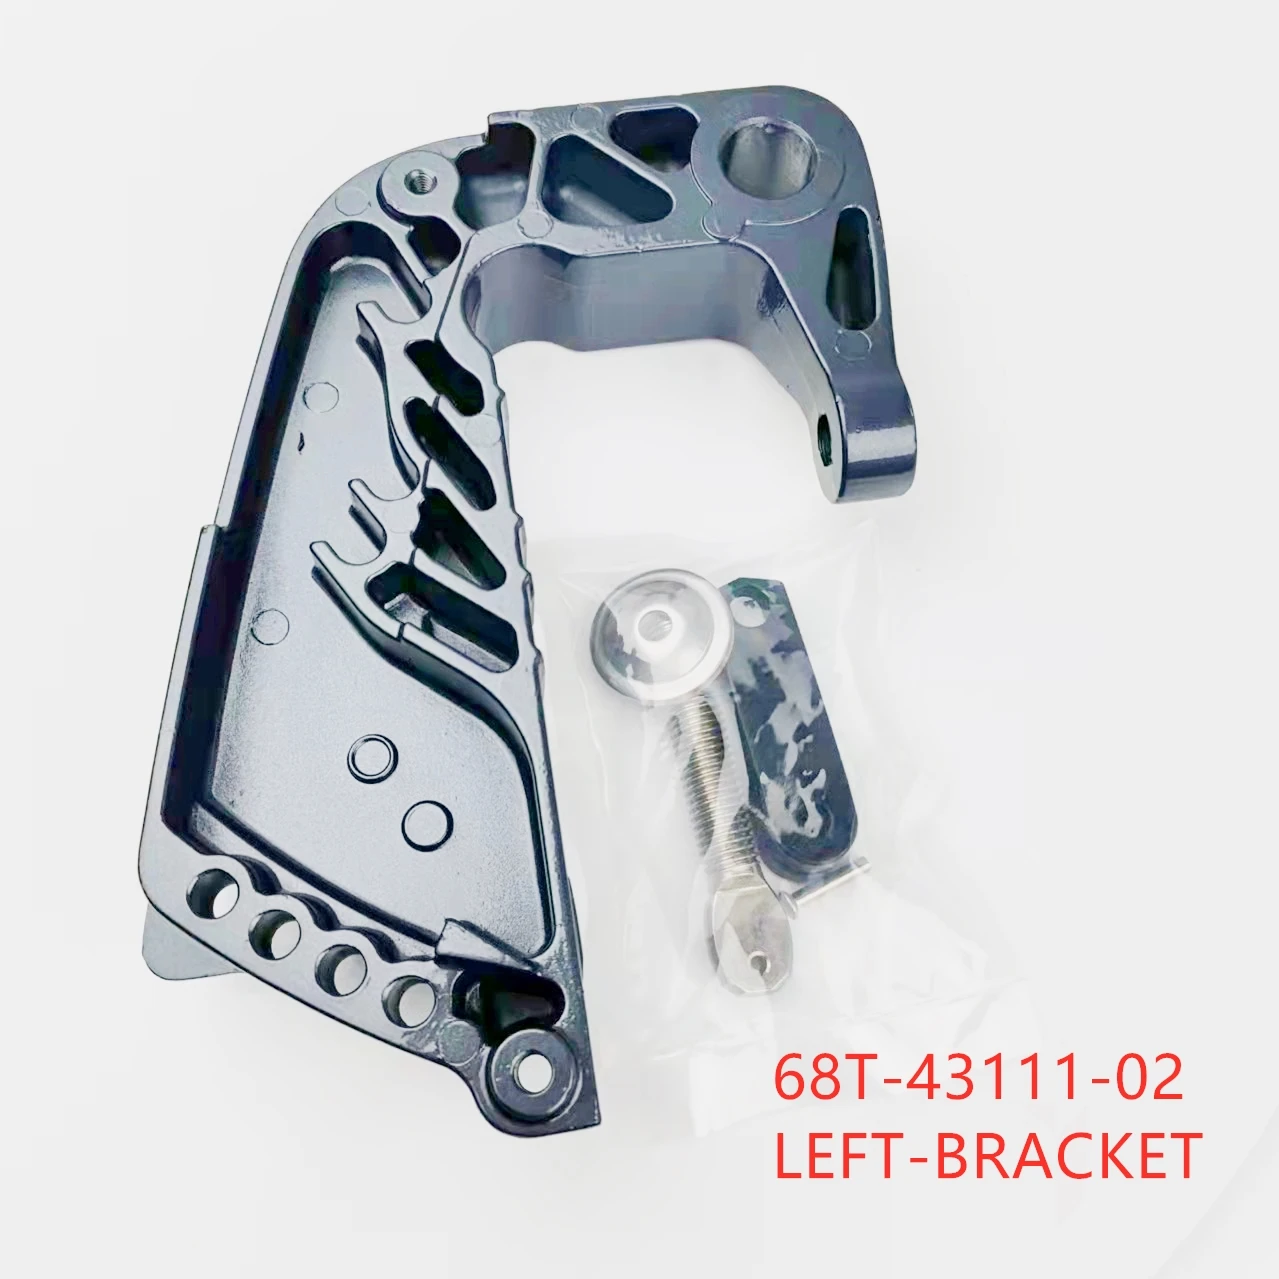 68T-43111-02-4D Right Bracket Clamp For Yamaha Outboard Motor 4T F8C; F6A;68R 69F 68T Series Engines Parsun HDX 68T-43111 bracket starting motor yamaha 6e5 81822 01 98